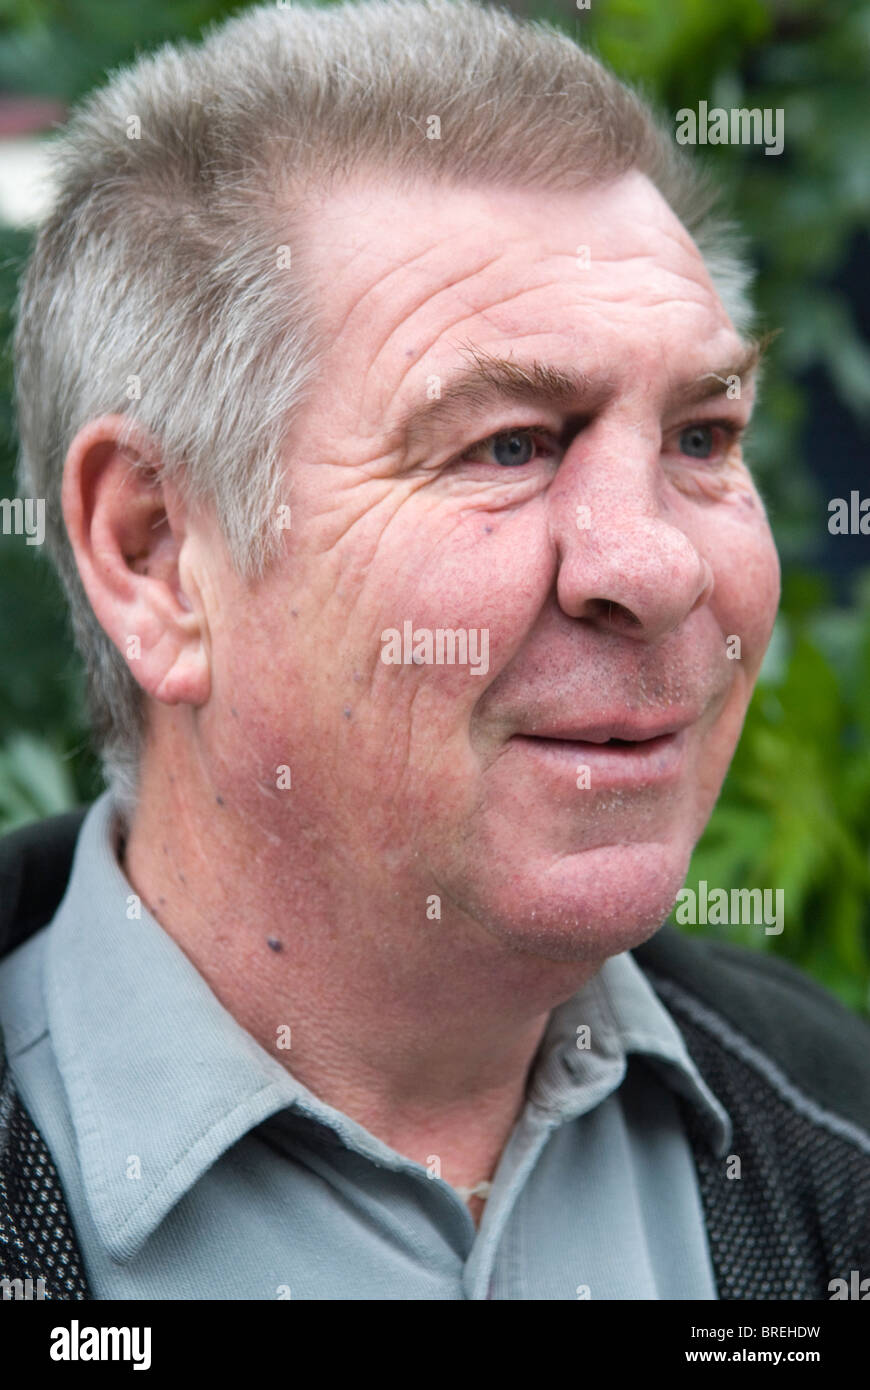 Broken nose man with disfigured face due to missed hospital appointments London UK  2010s HOMER SYKES Stock Photo